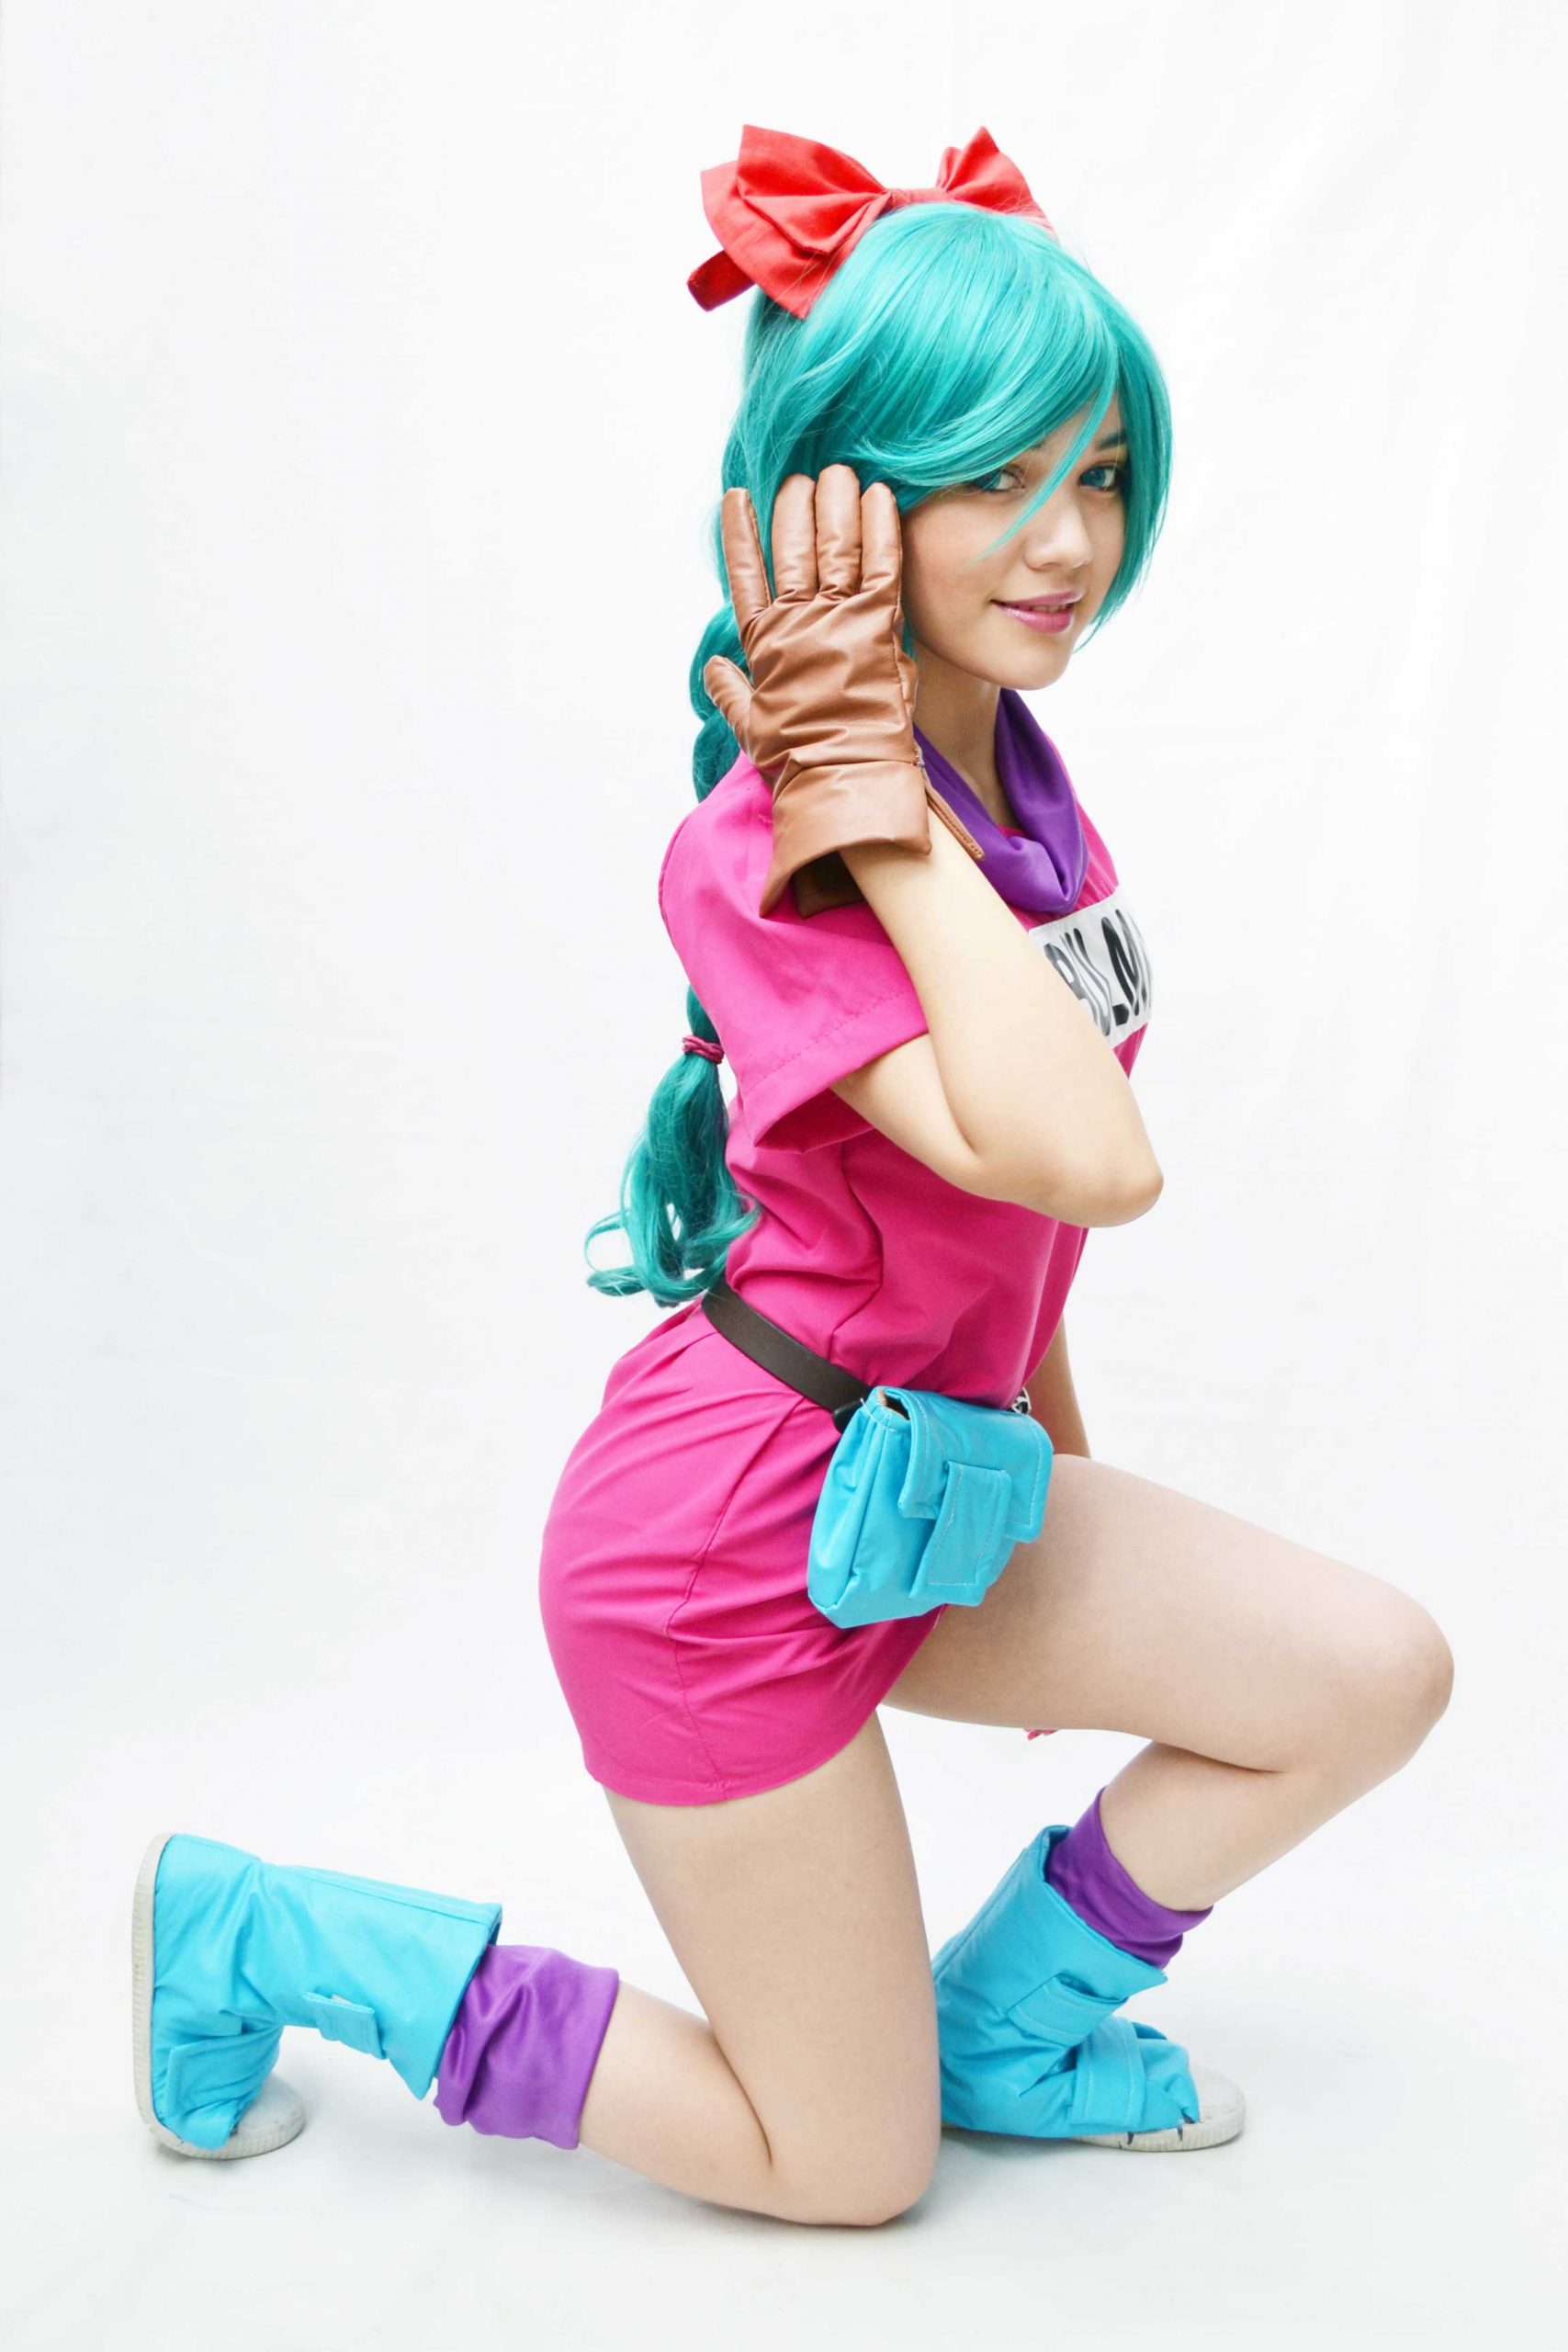 70+ Hot Pictures Of Bulma From Dragon Ball Z Are Sure To Get Your Heart Thumping Fast 172